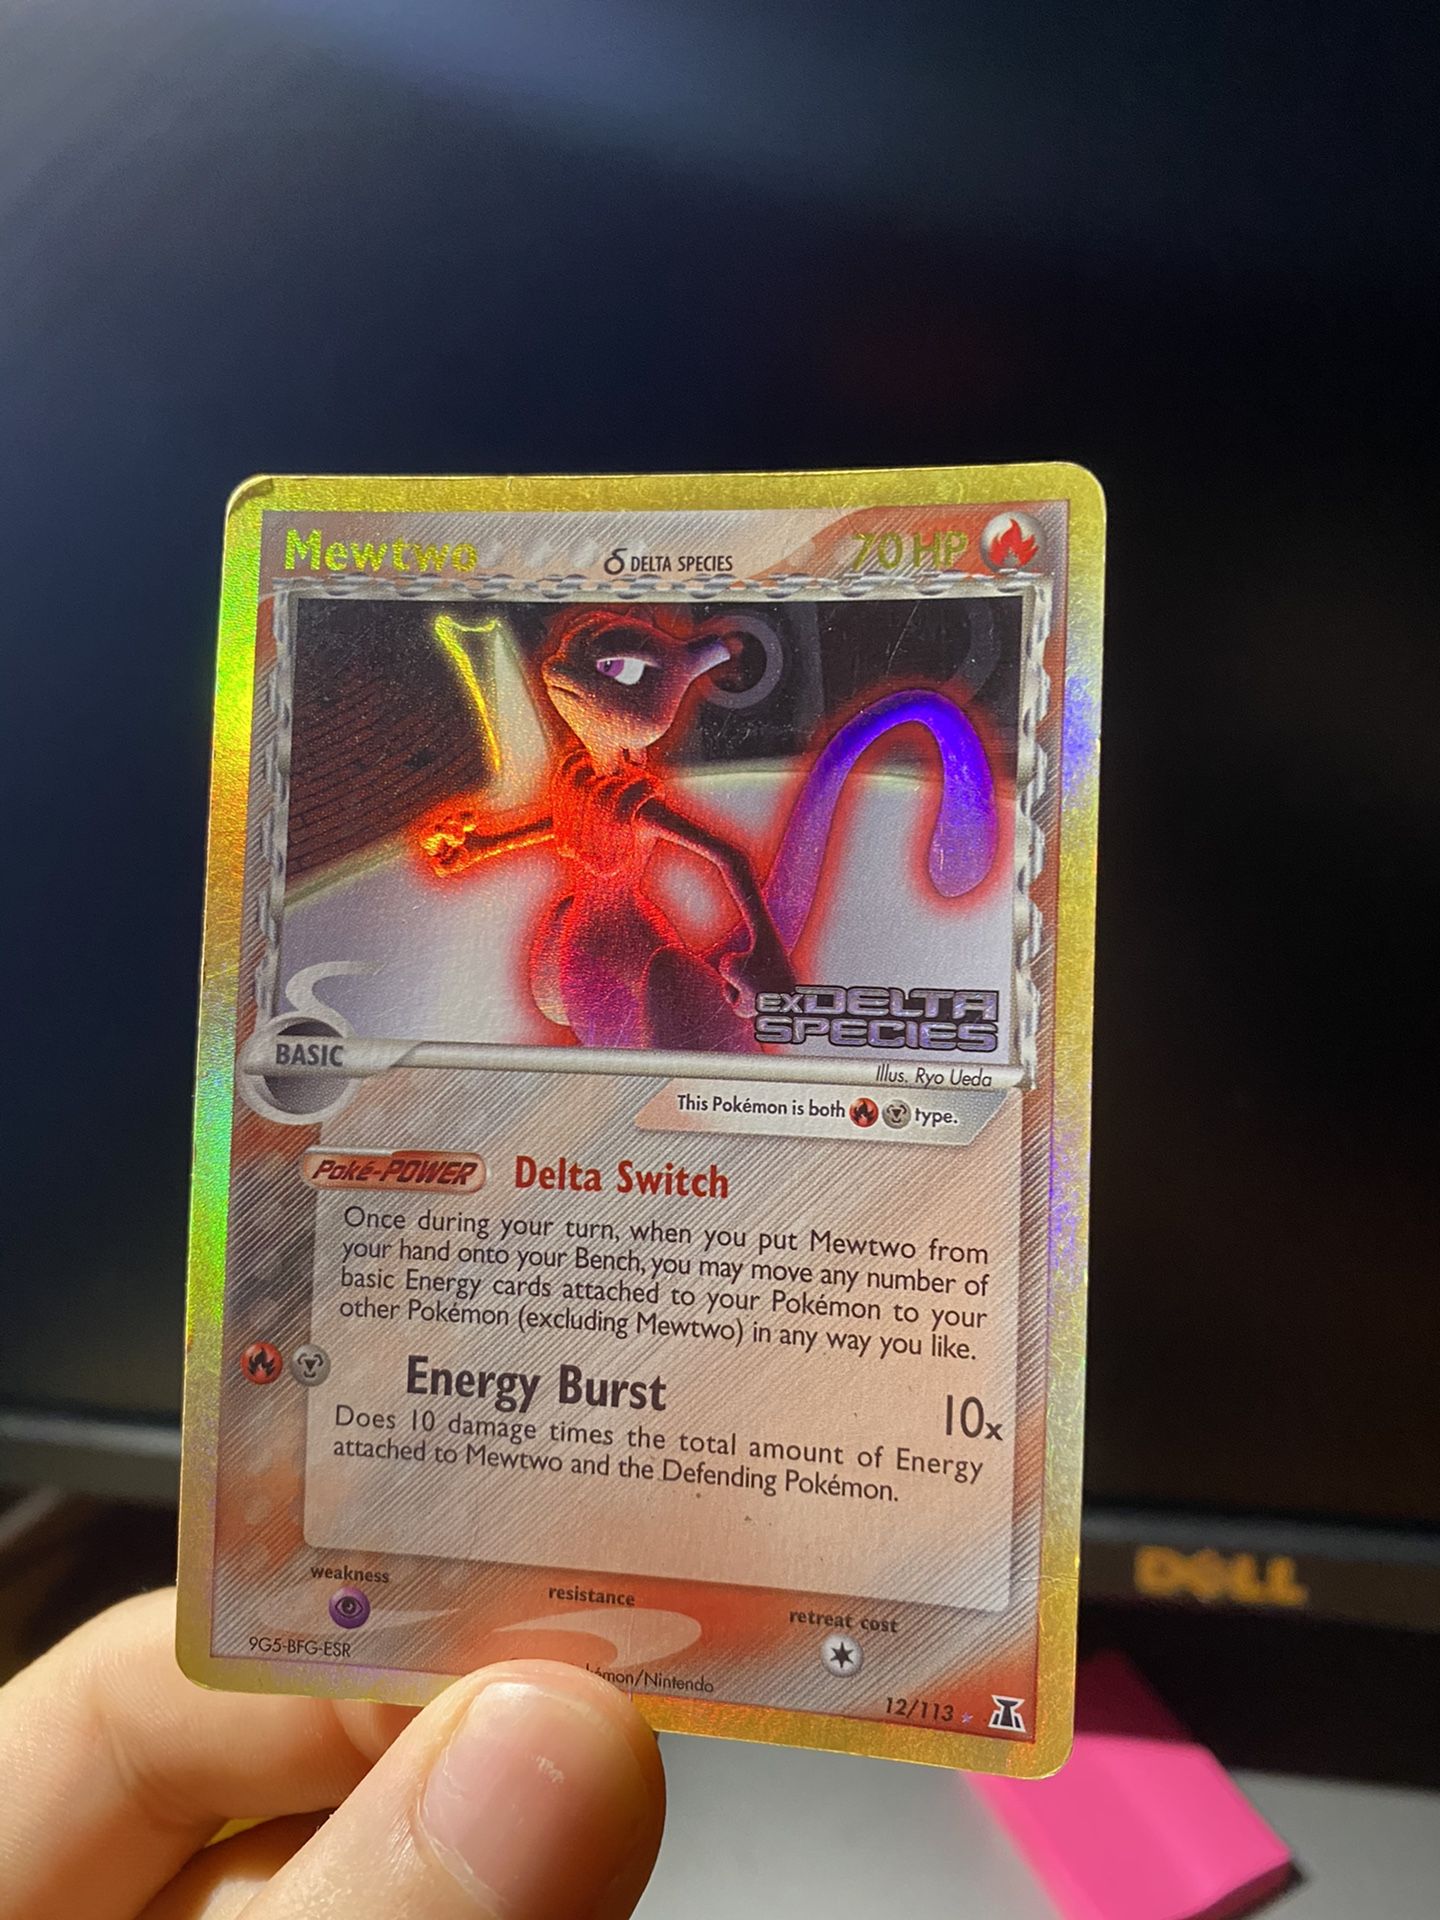 Stamped mewtwo ex delta species holo pokemon card